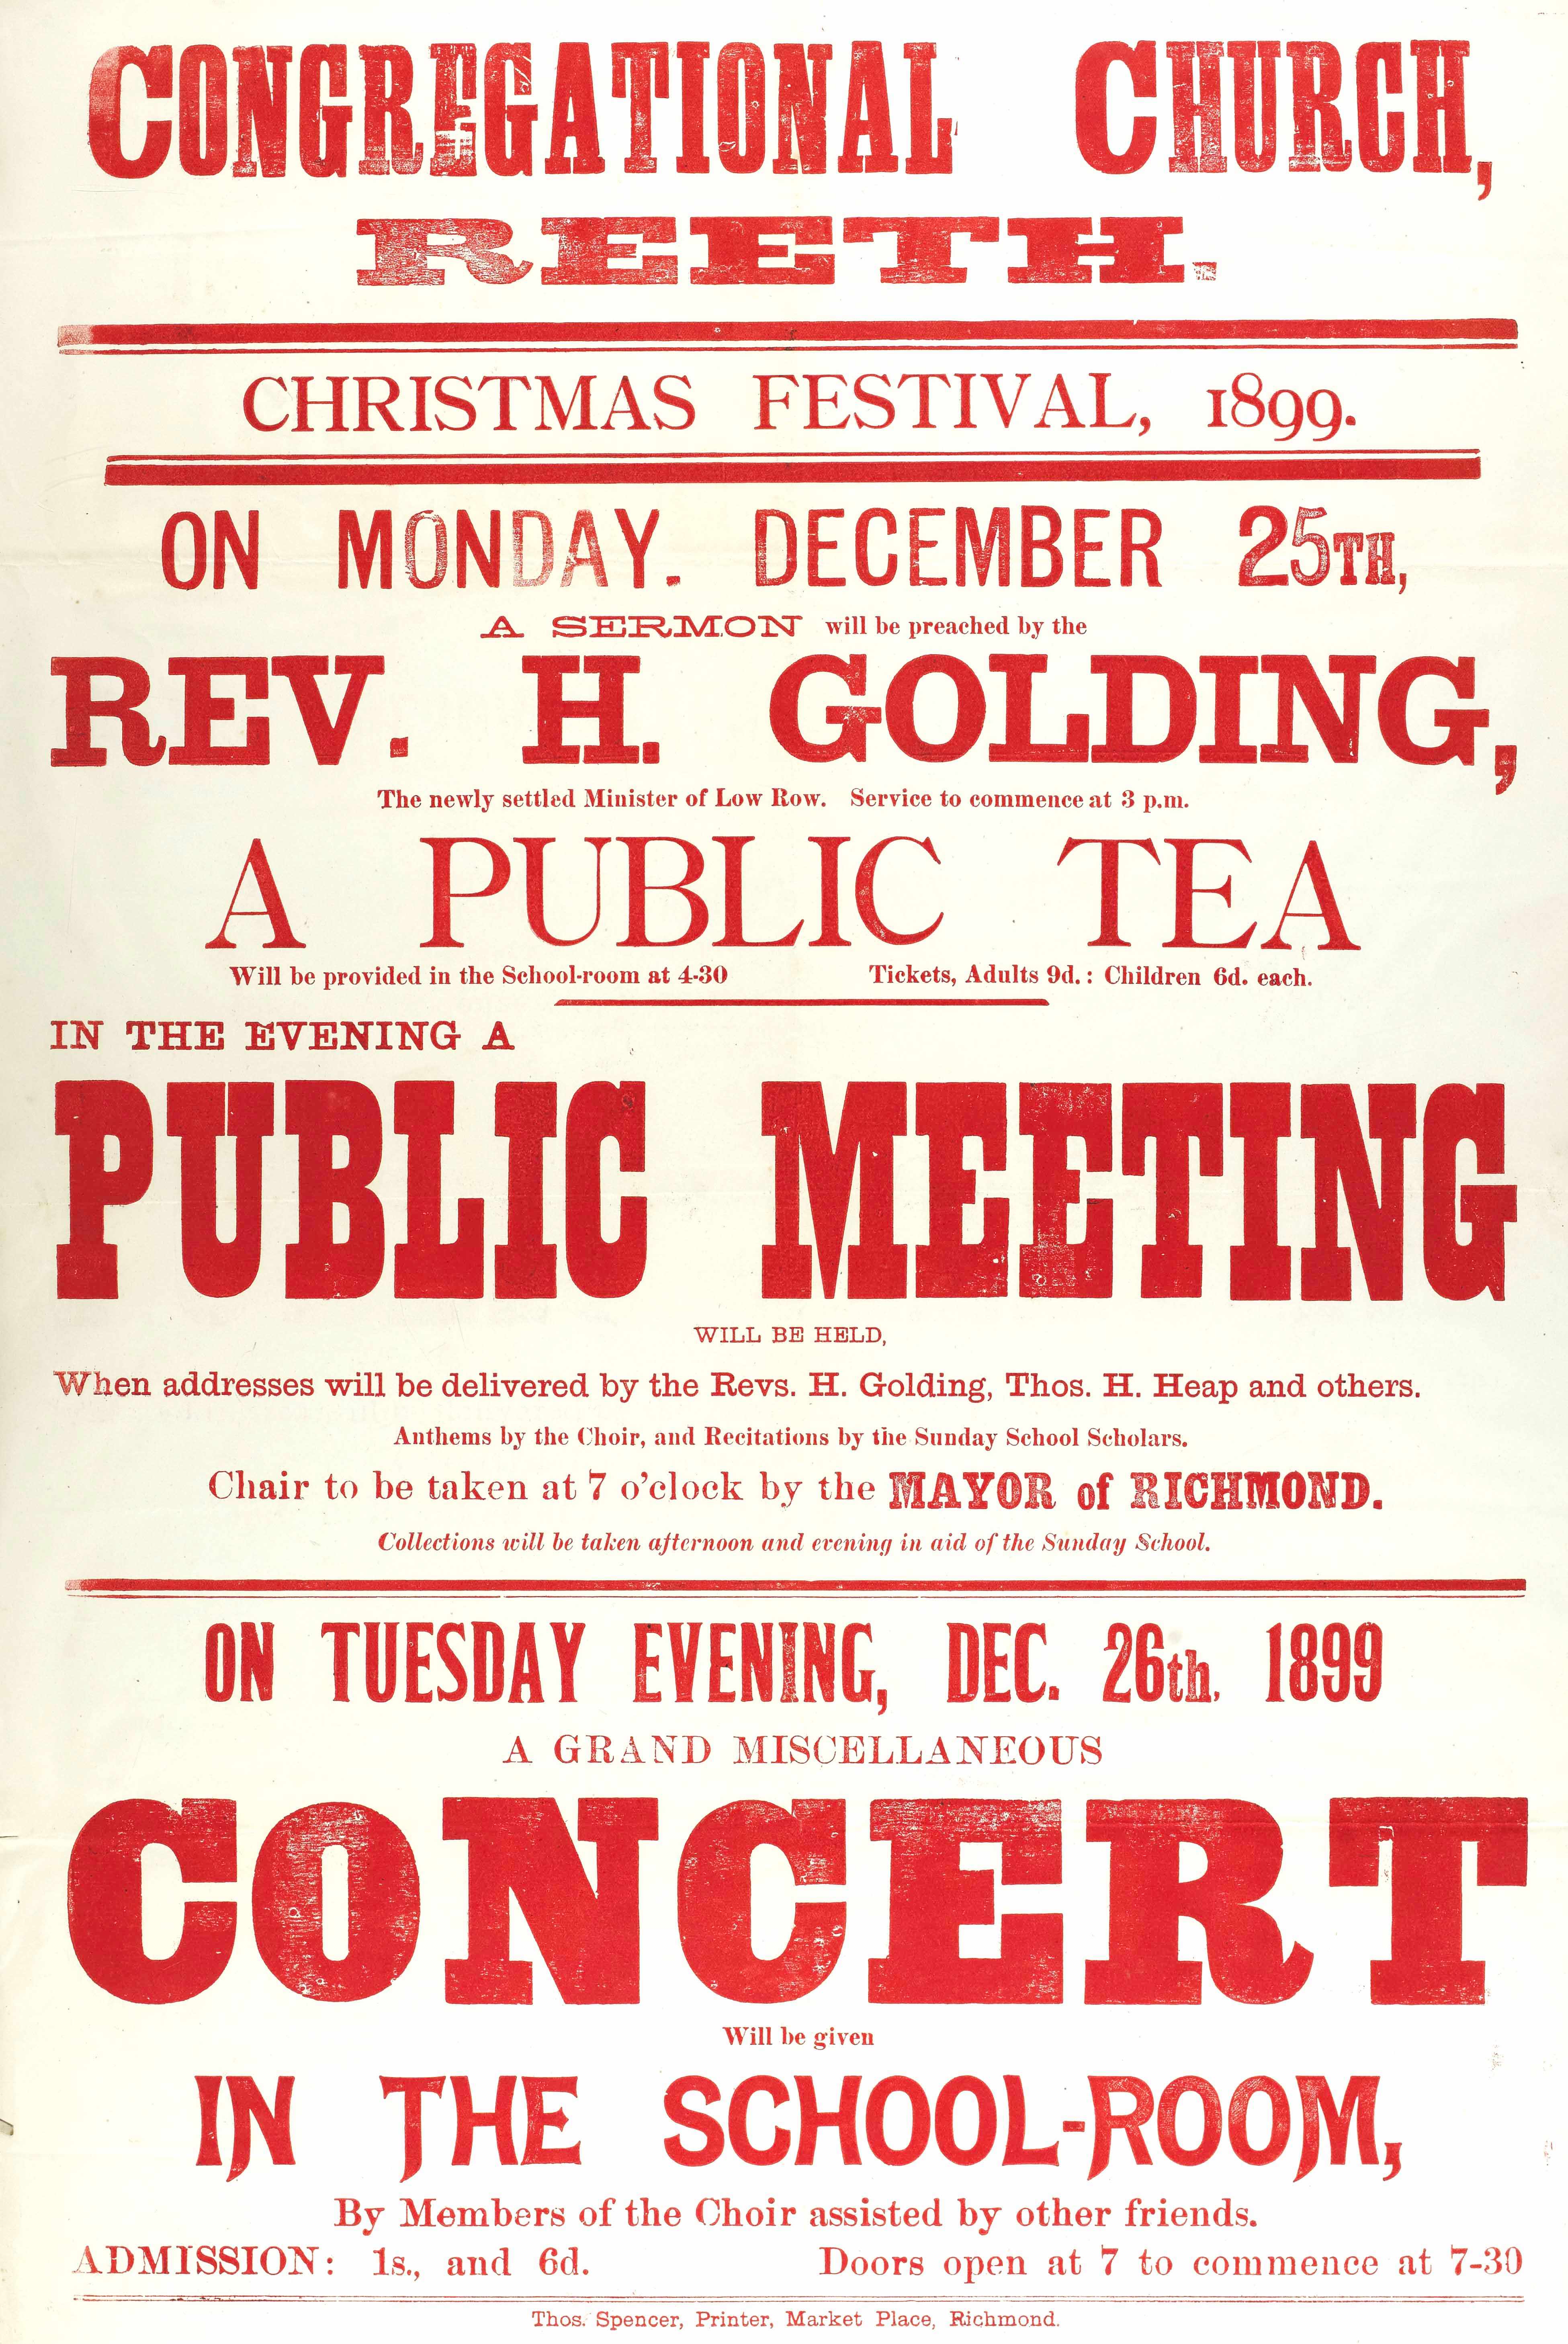 Reeth’s Christmas Festival poster from 1899.